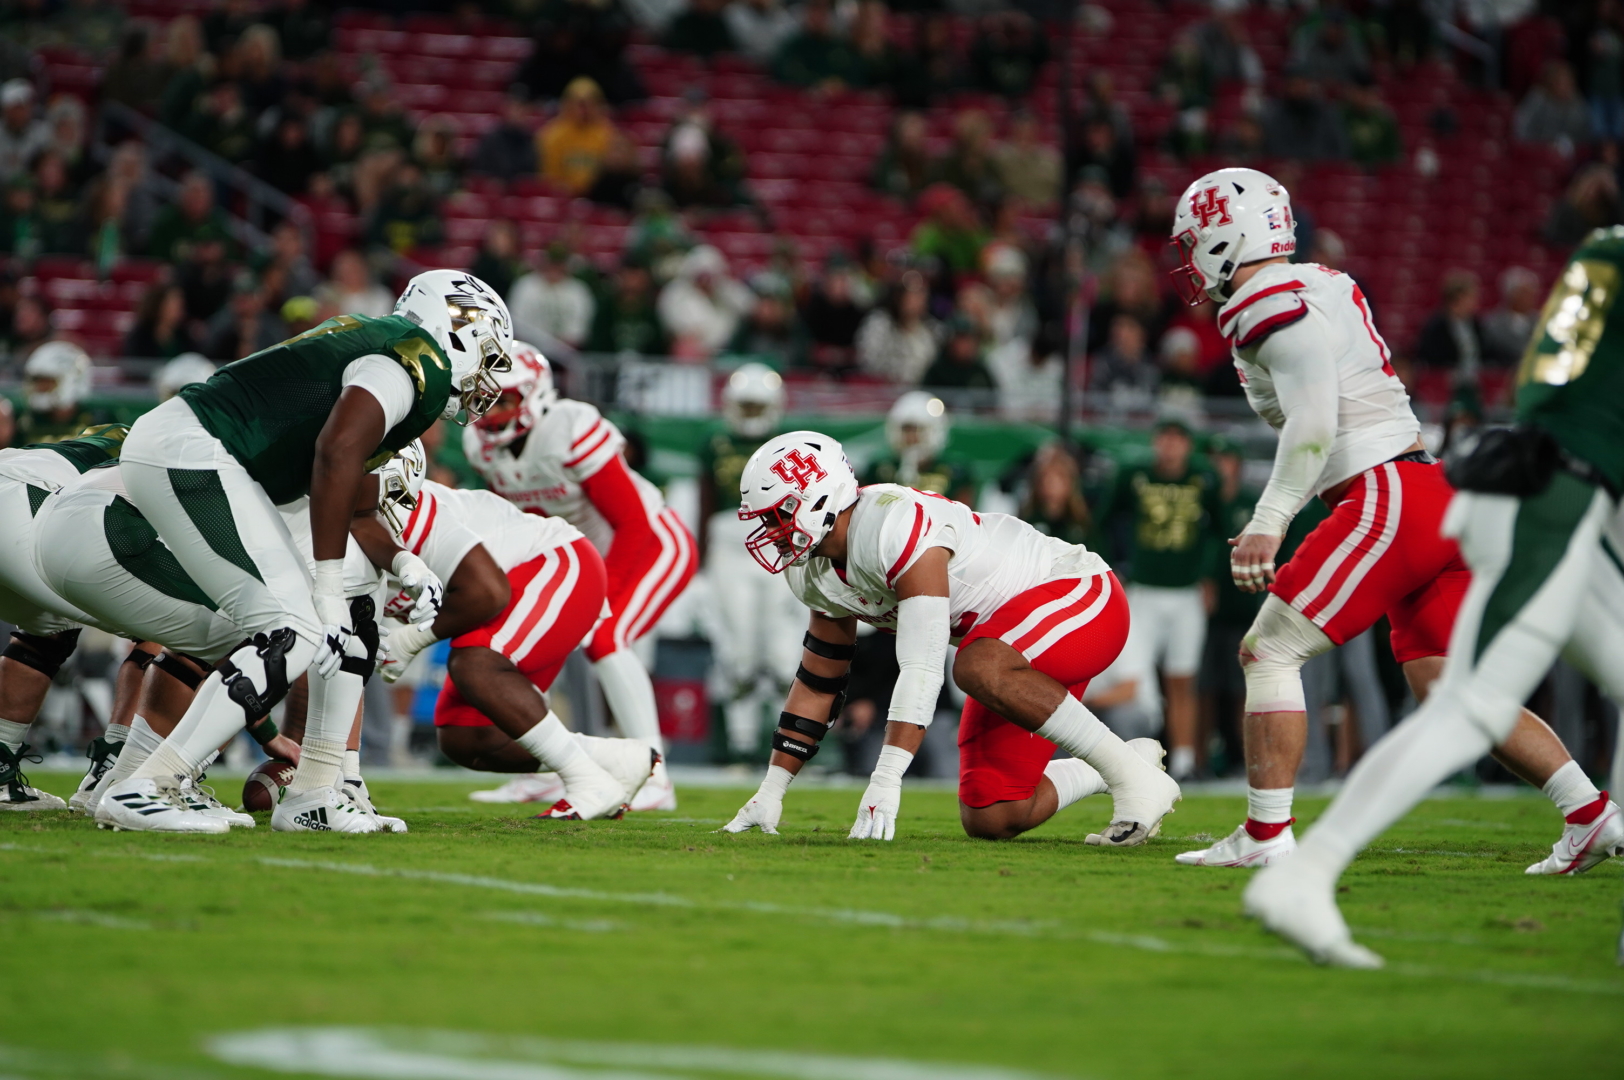 UH has a chance to clinch a spot in the AAC Championship game with a win over Temple on Saturday. | Courtesy of UH athletics